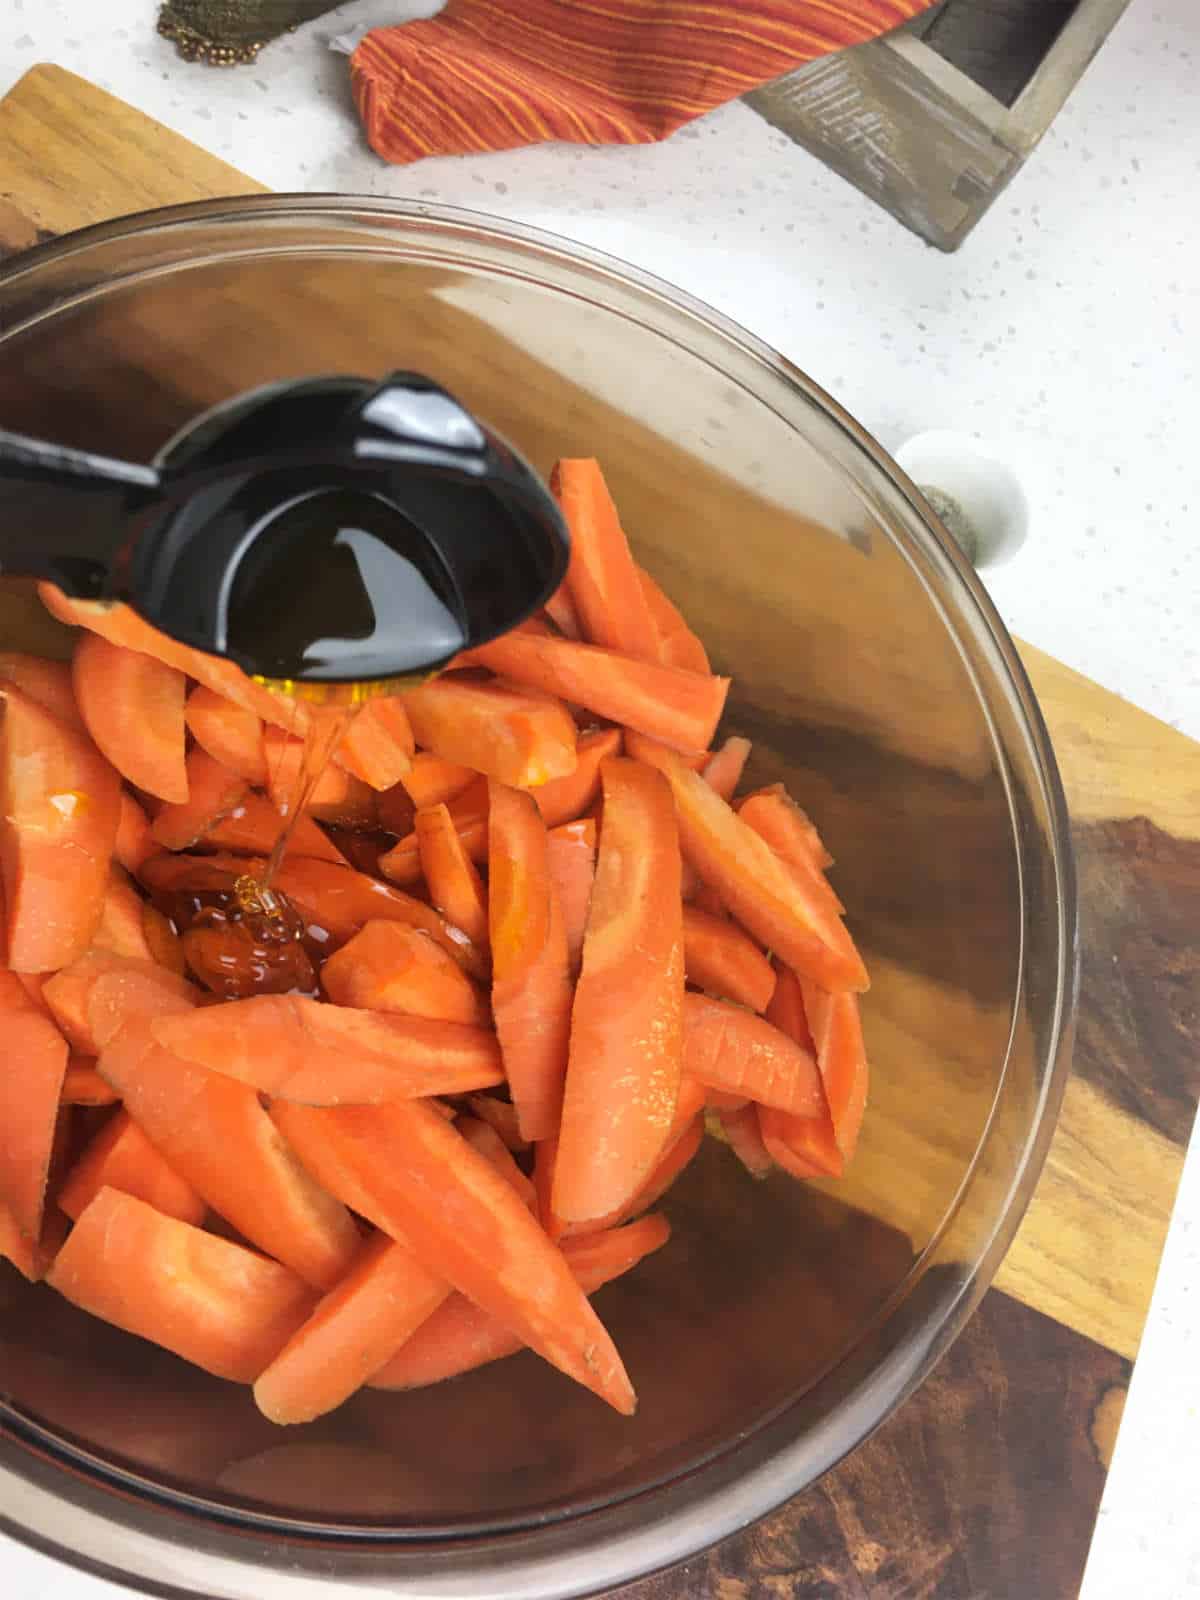 honey added to bowl of cut carrots.